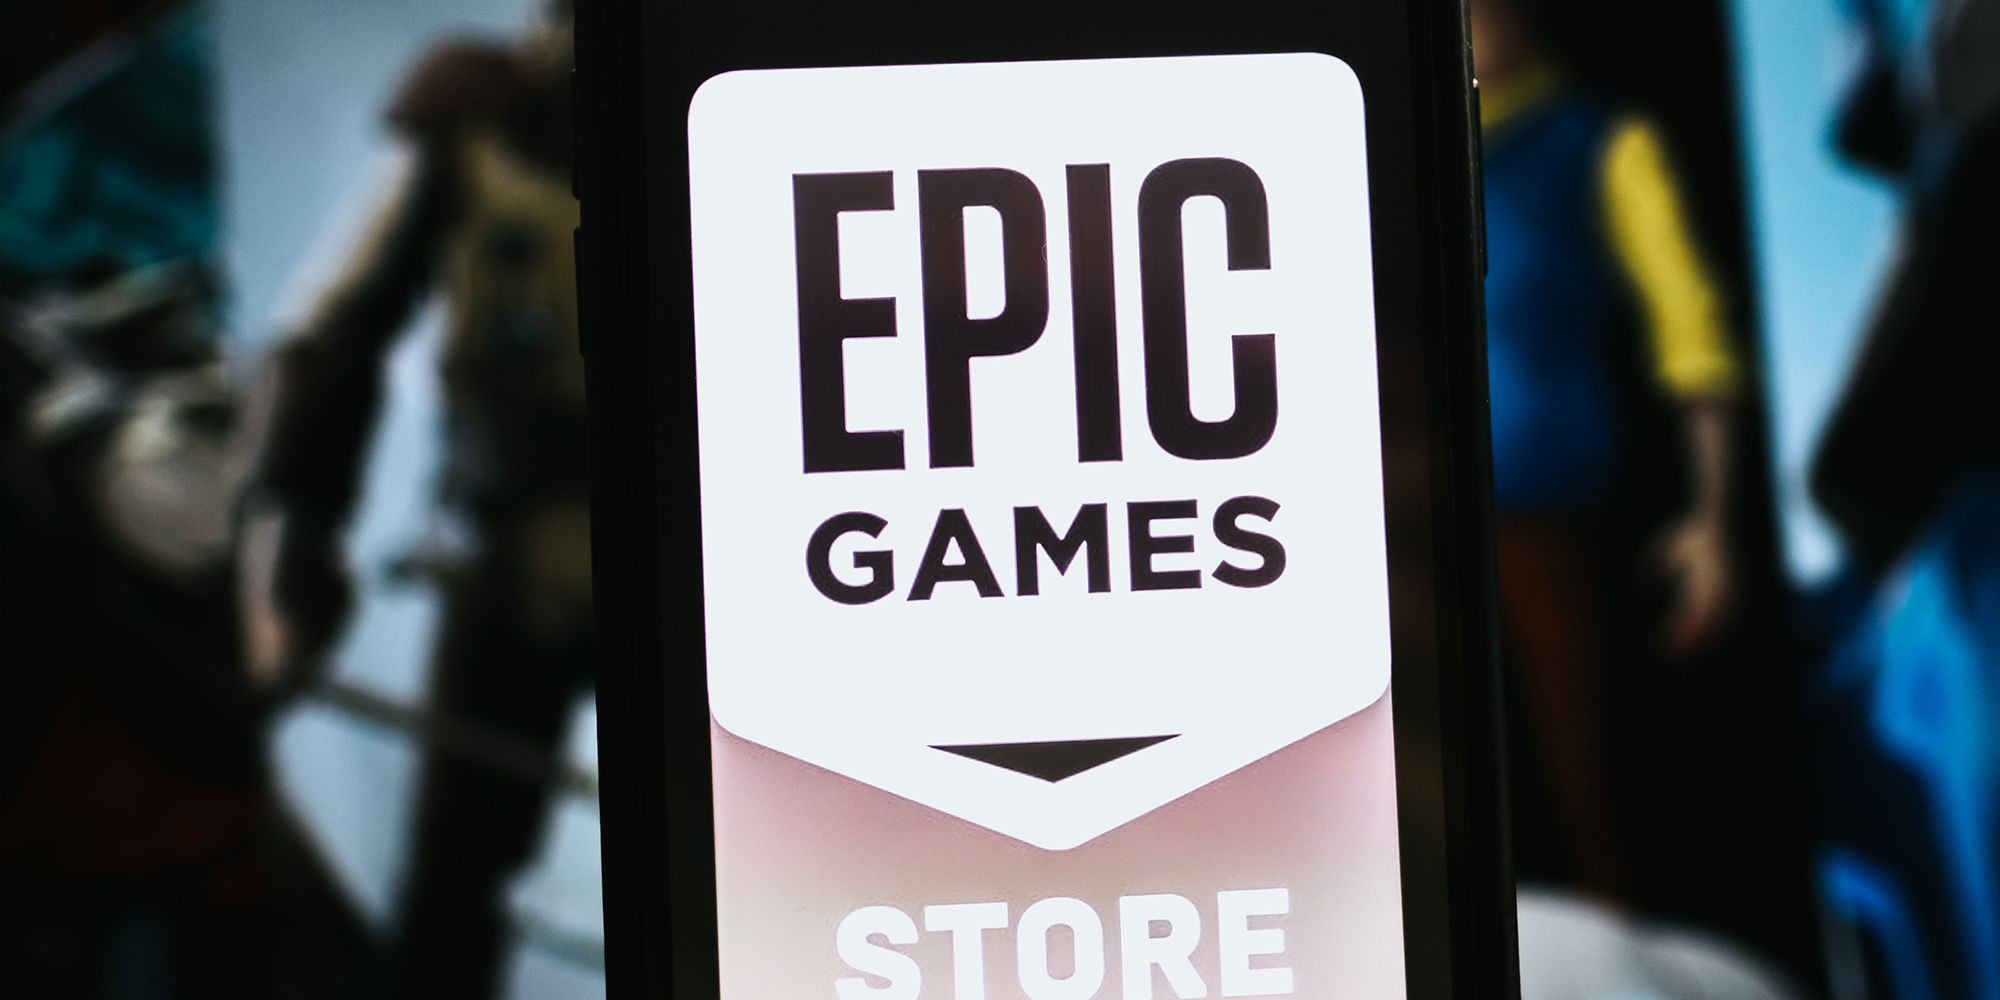 Epic Games Store logo on a phone